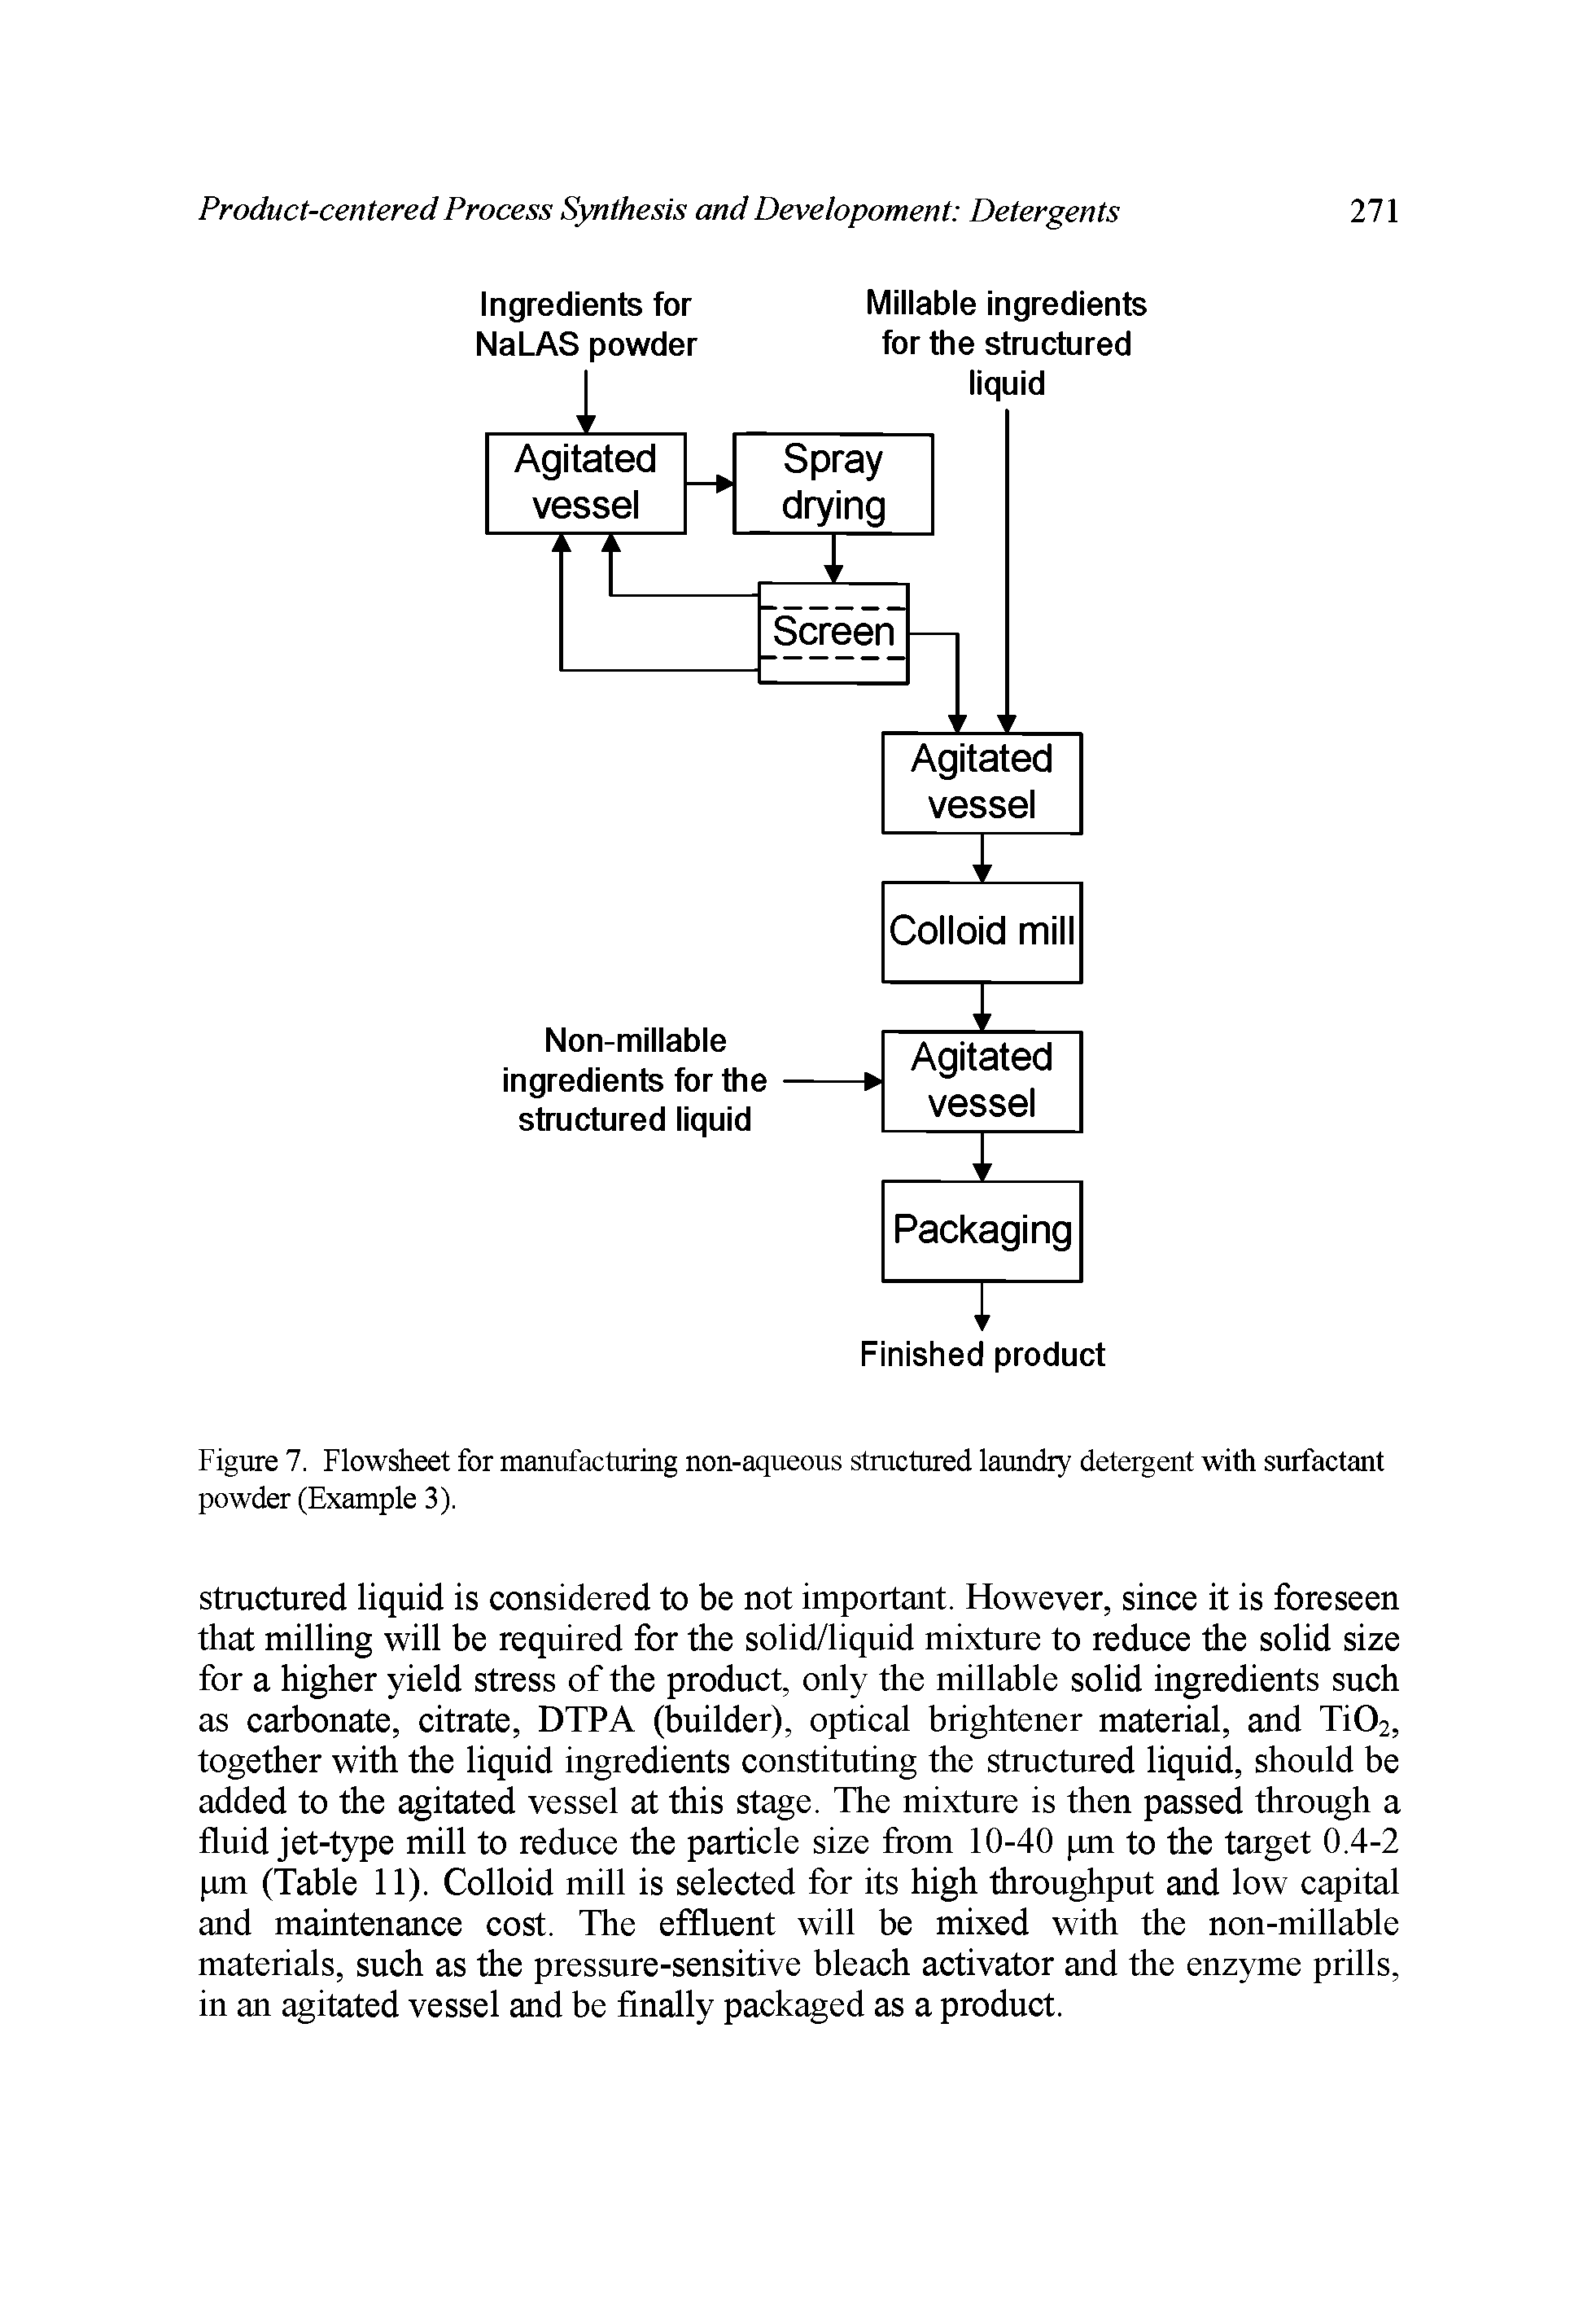 Figure 7. Flowsheet for manufacturing non-aqueous structured laundry detergent with surfactant powder (Example 3).